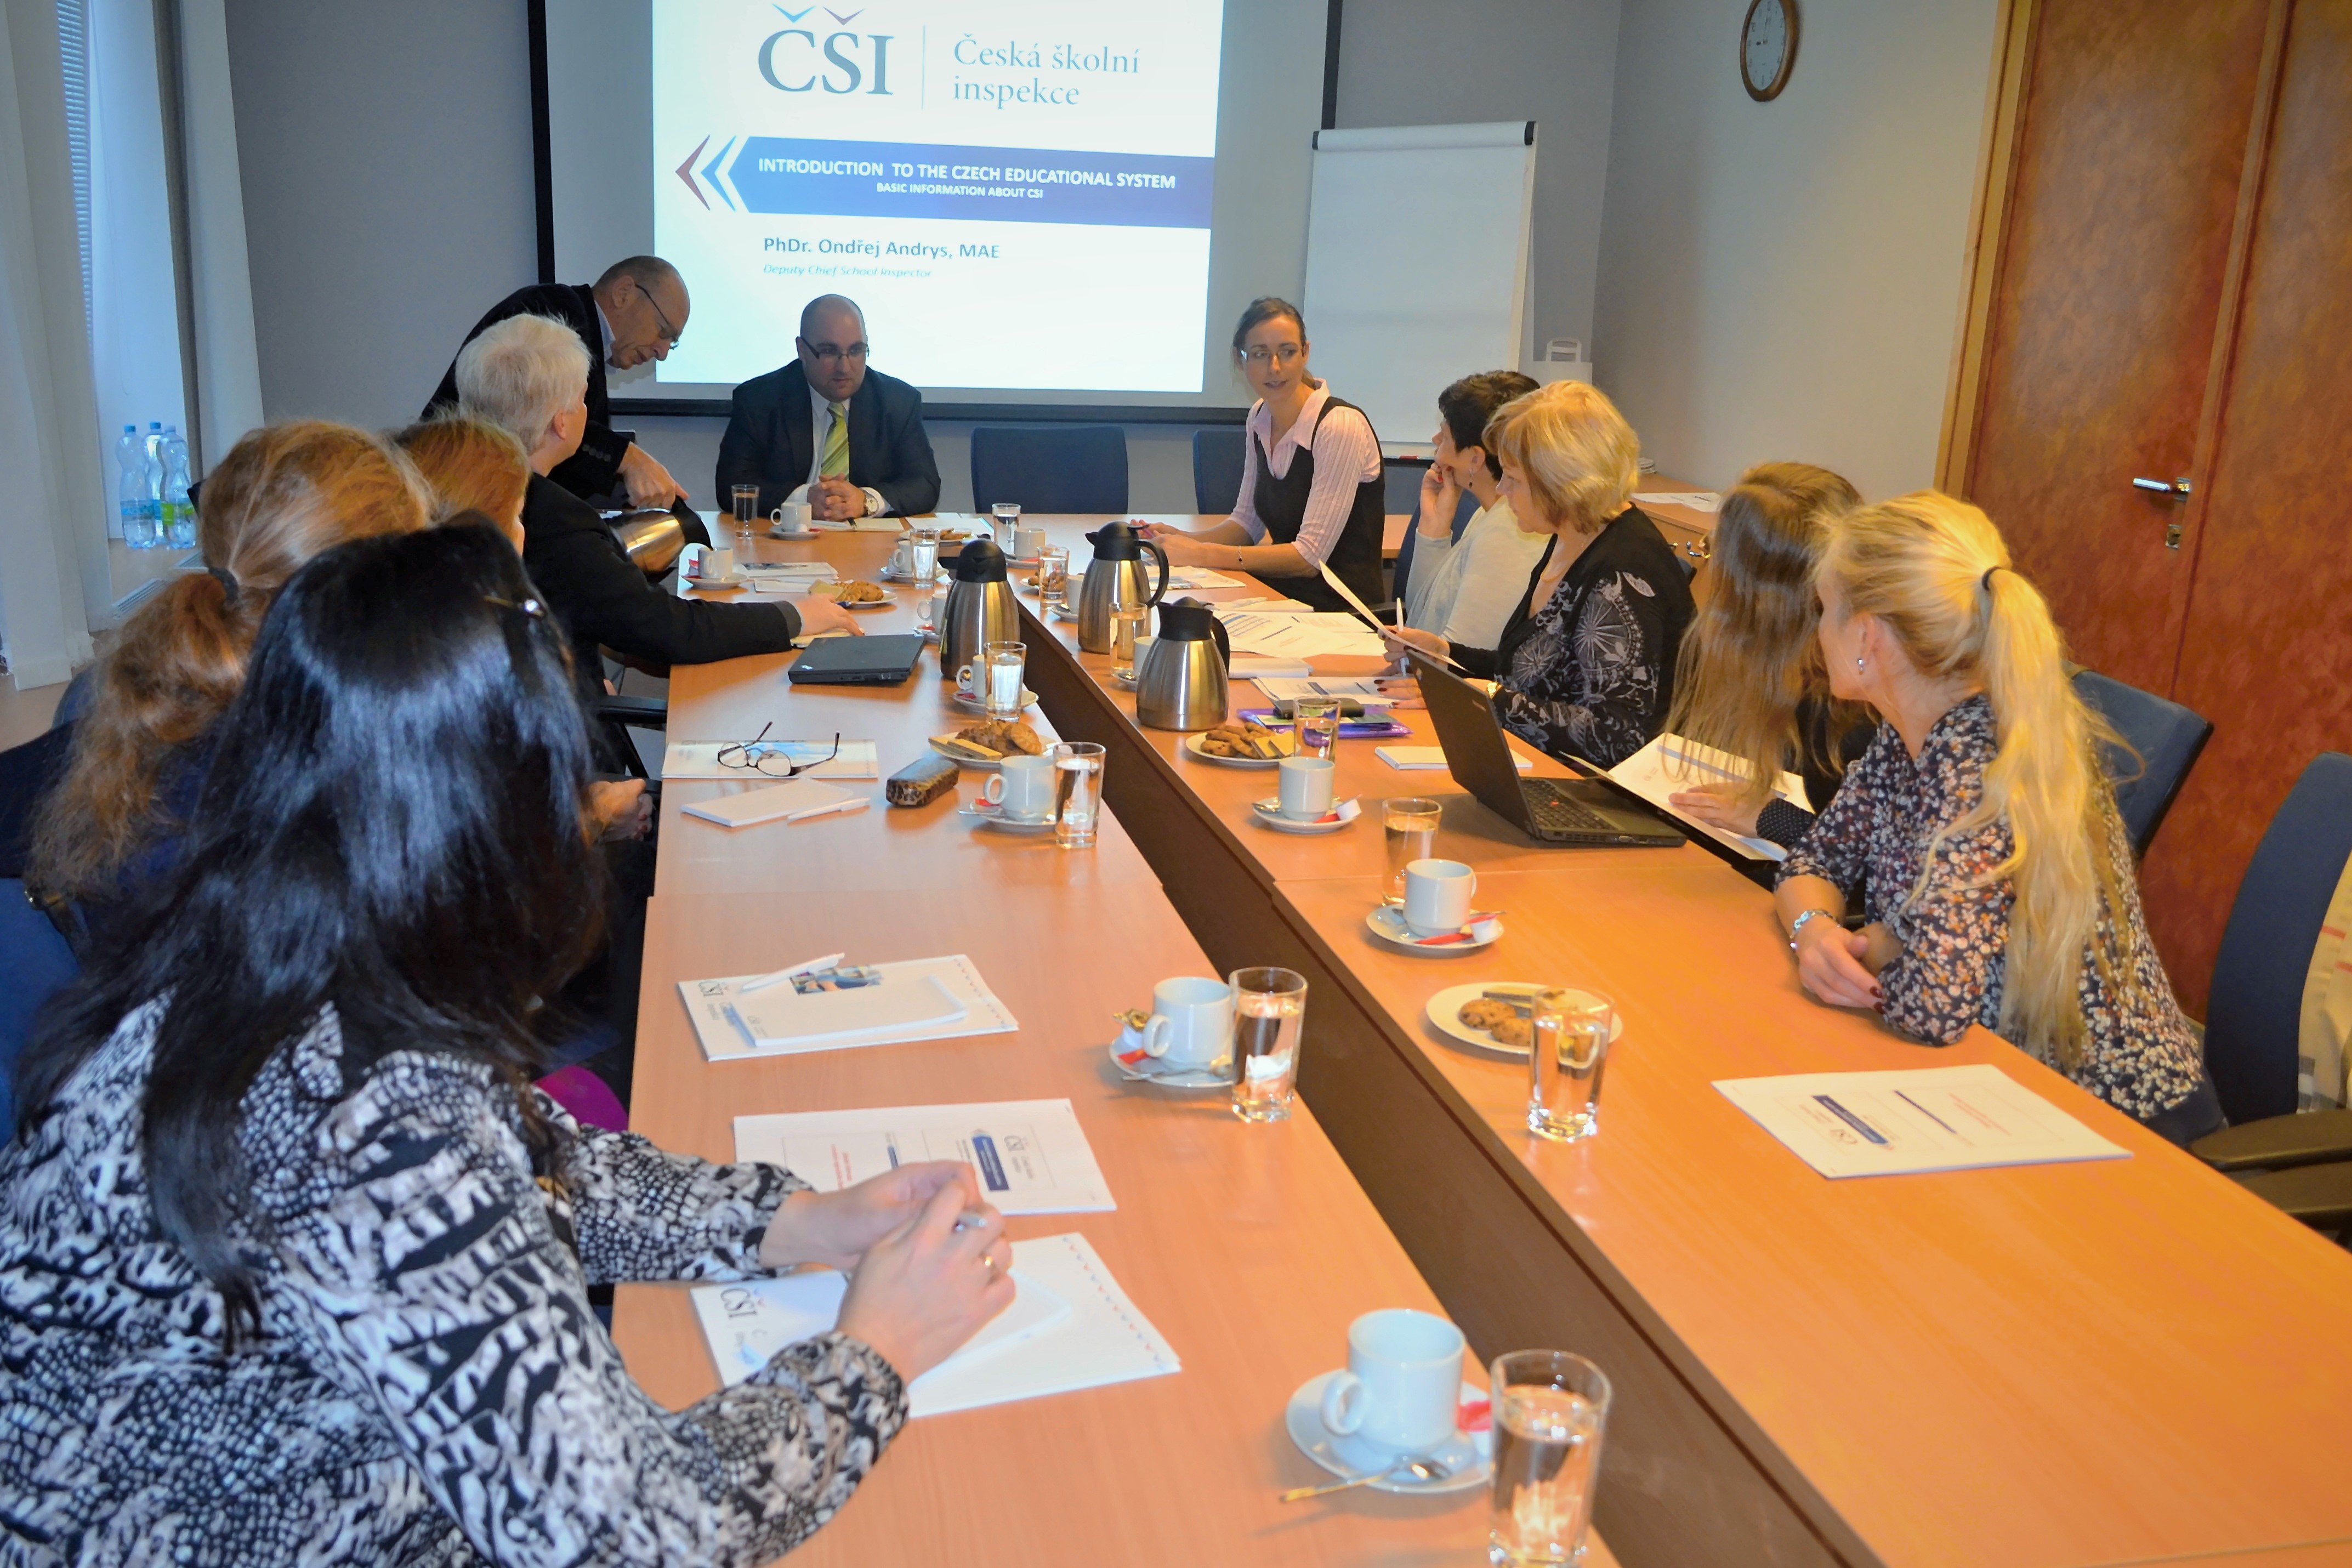 The CSI hosted a Delegation from the Estonian Ministry of Education